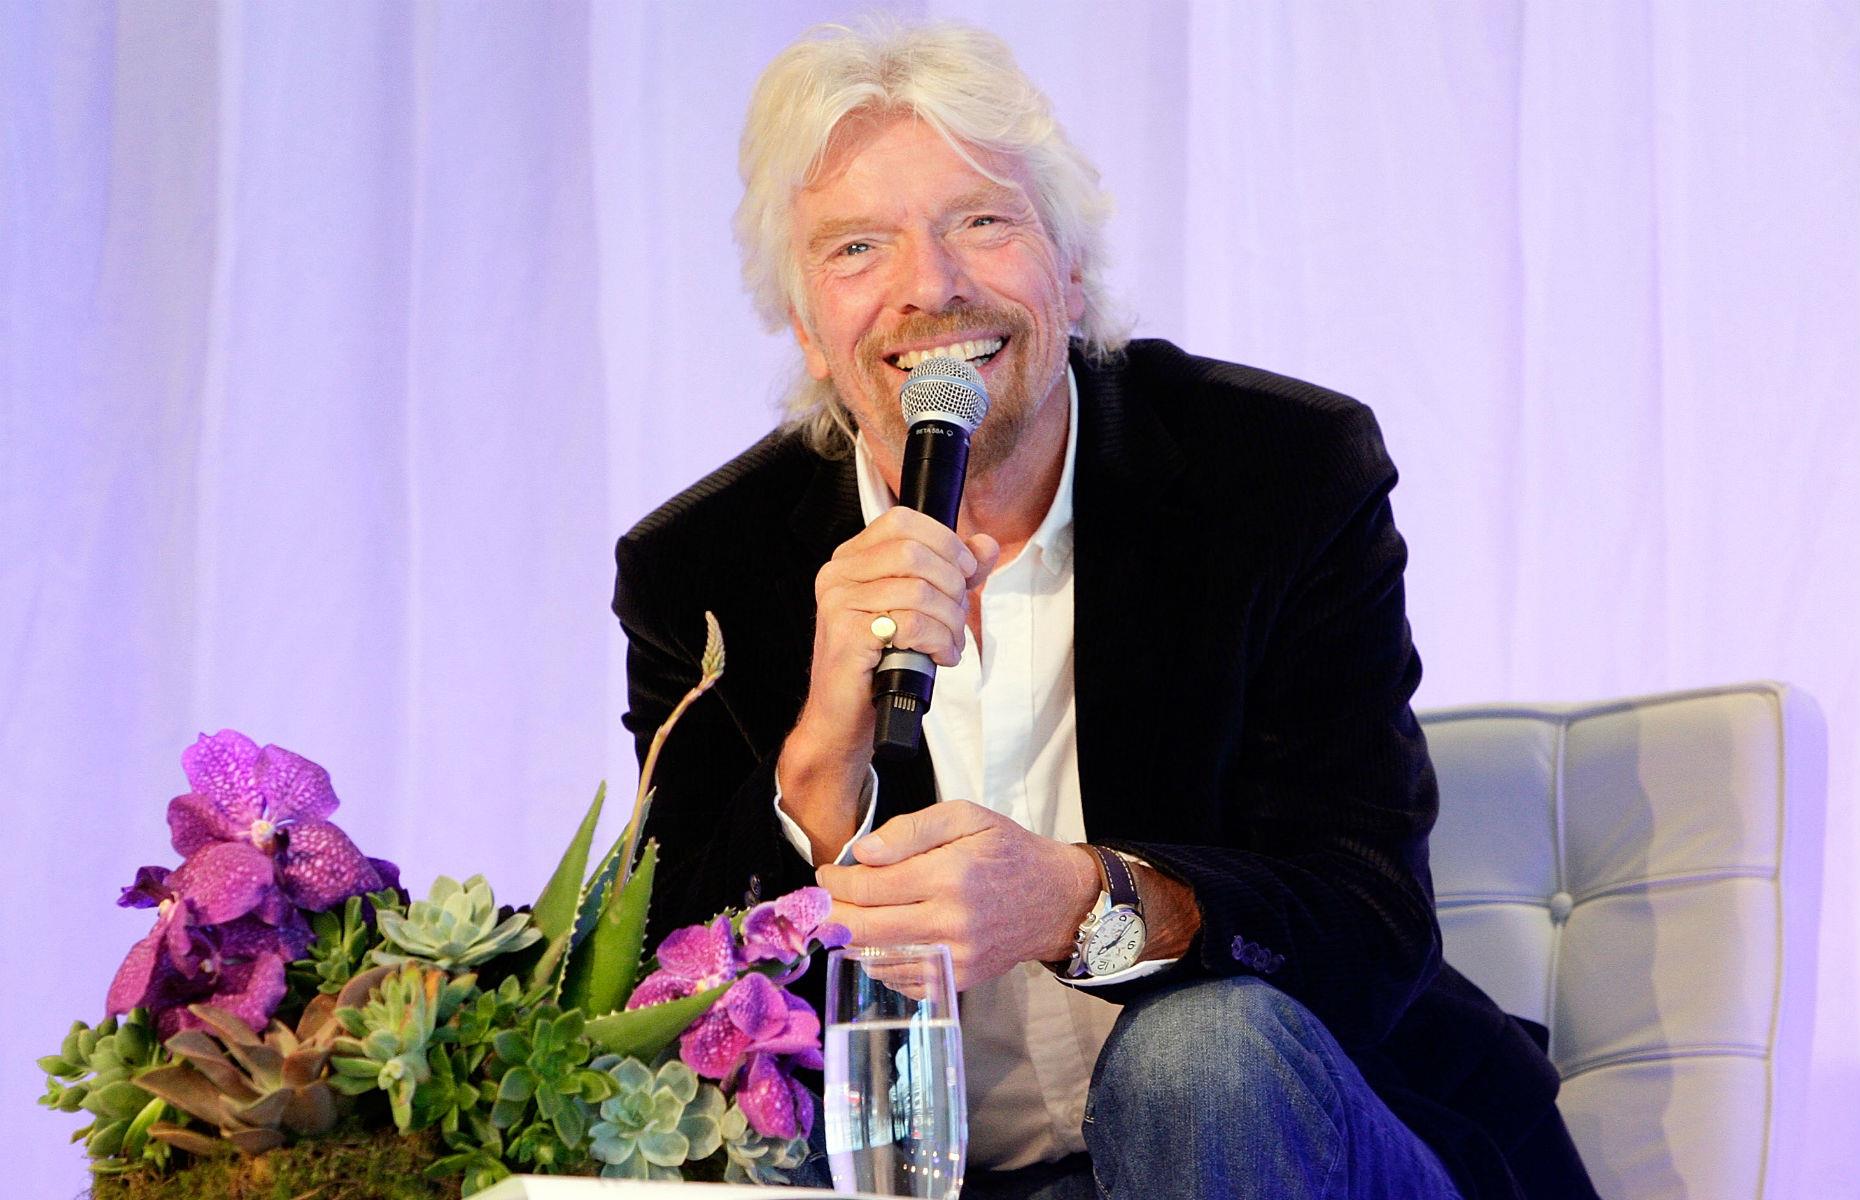 Richard Branson – Never look back in regret, move onto the next thing